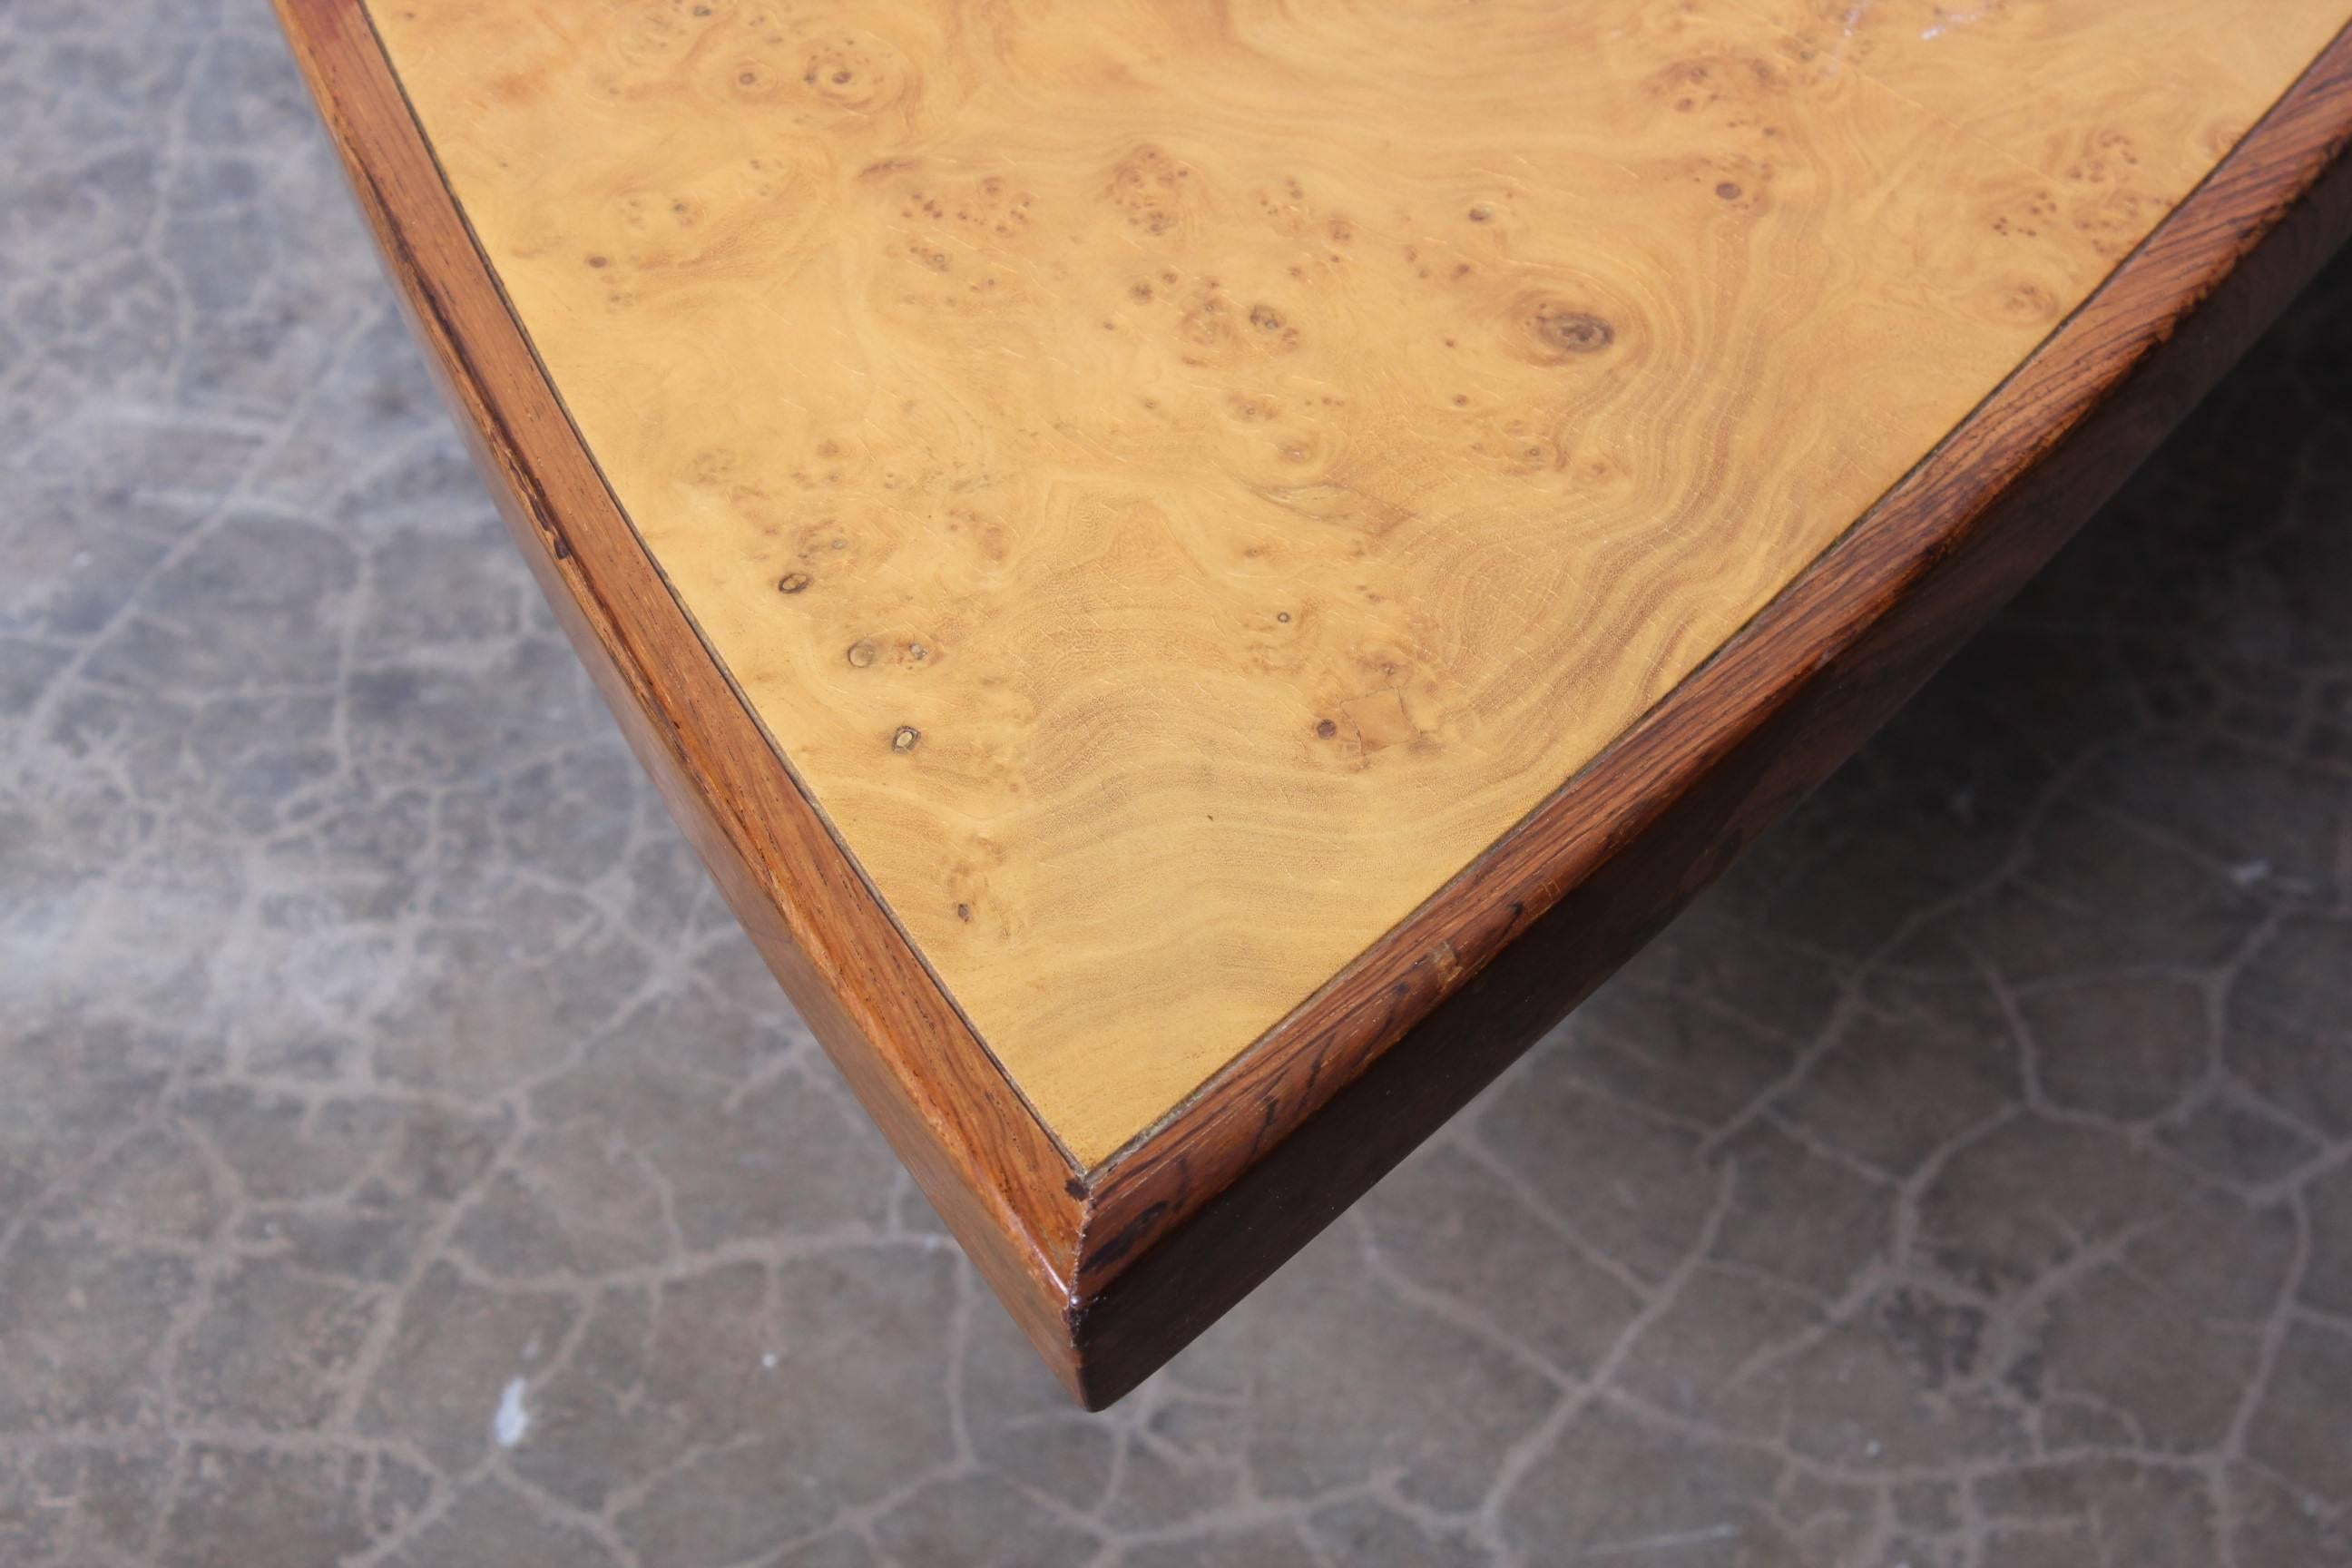 A large coffee table made of solid rosewood and carpathian elm. Designed by George Nakashima for Widdicomb.